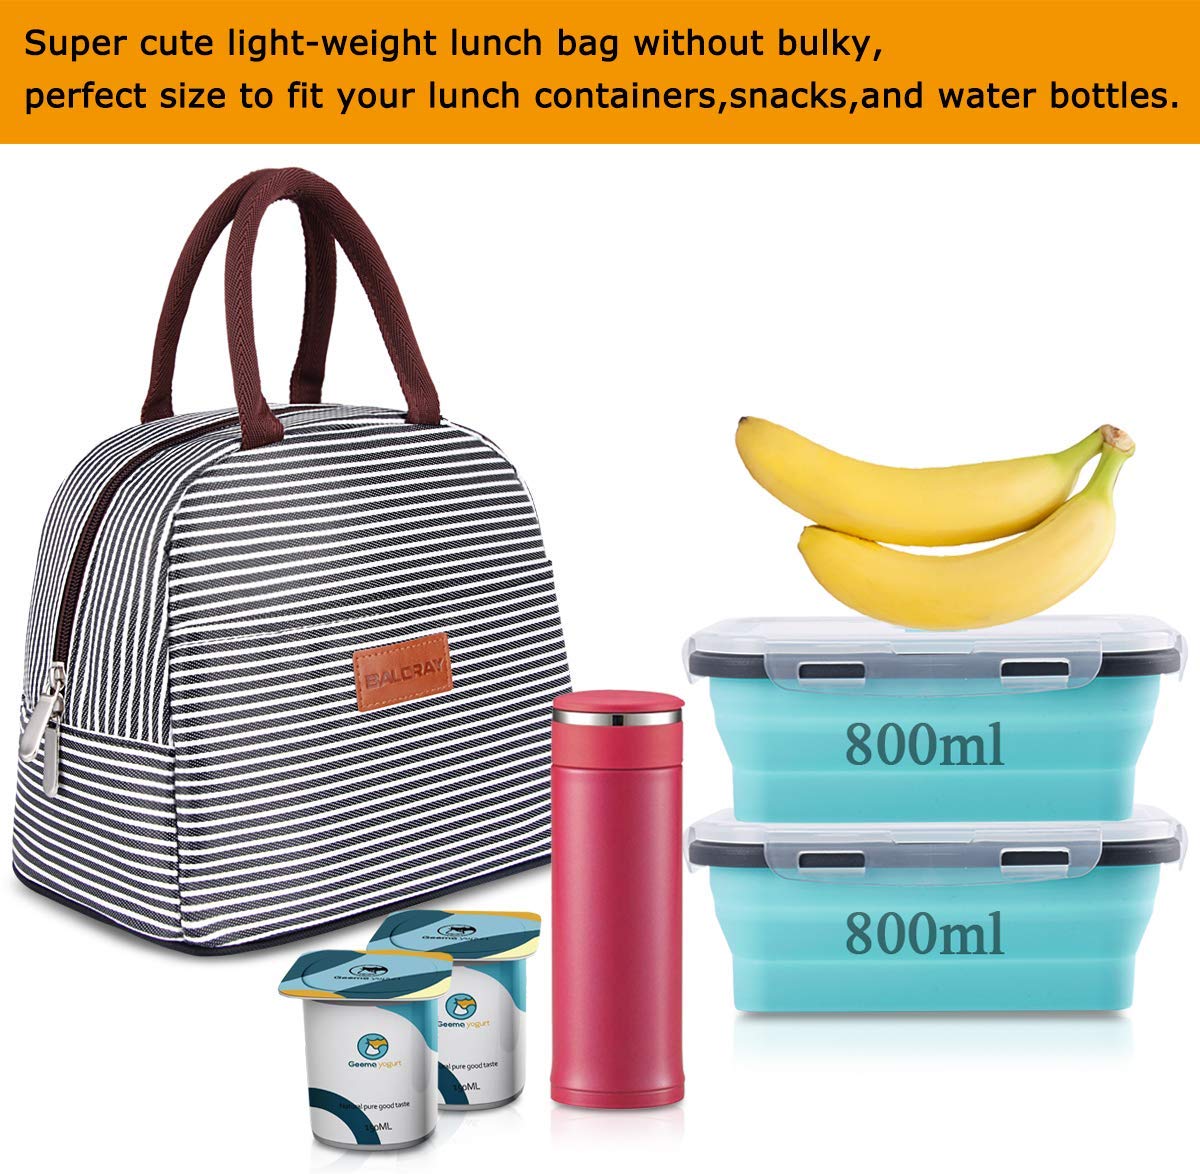 Top 10 Best Lunch Bags For Nurses Reviews - Brand Review